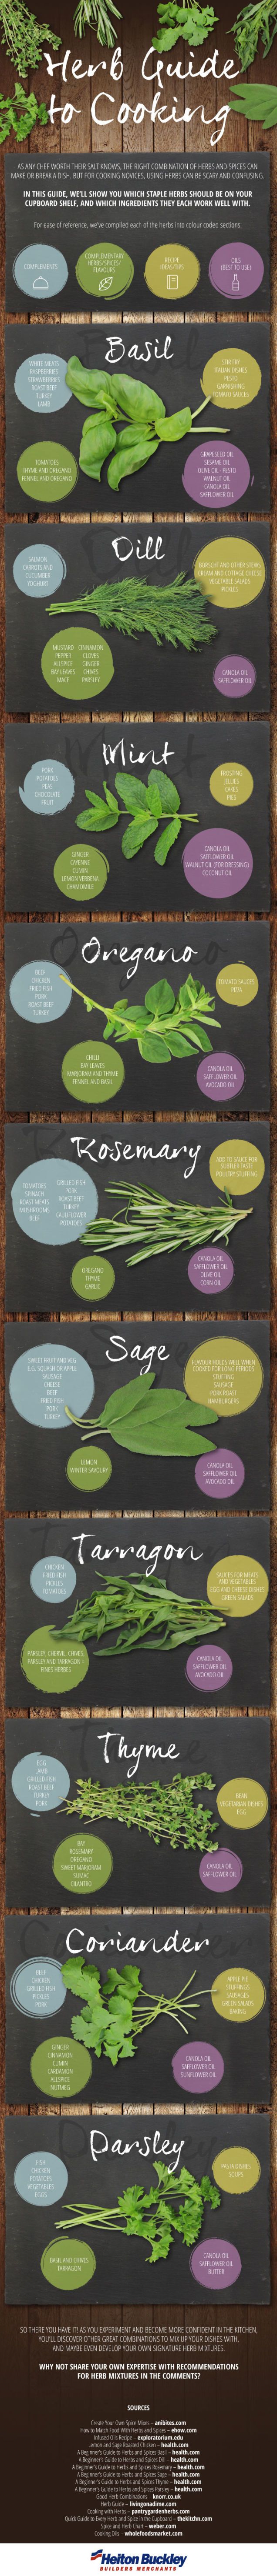 Herbs Guide to Cooking (Infographic)